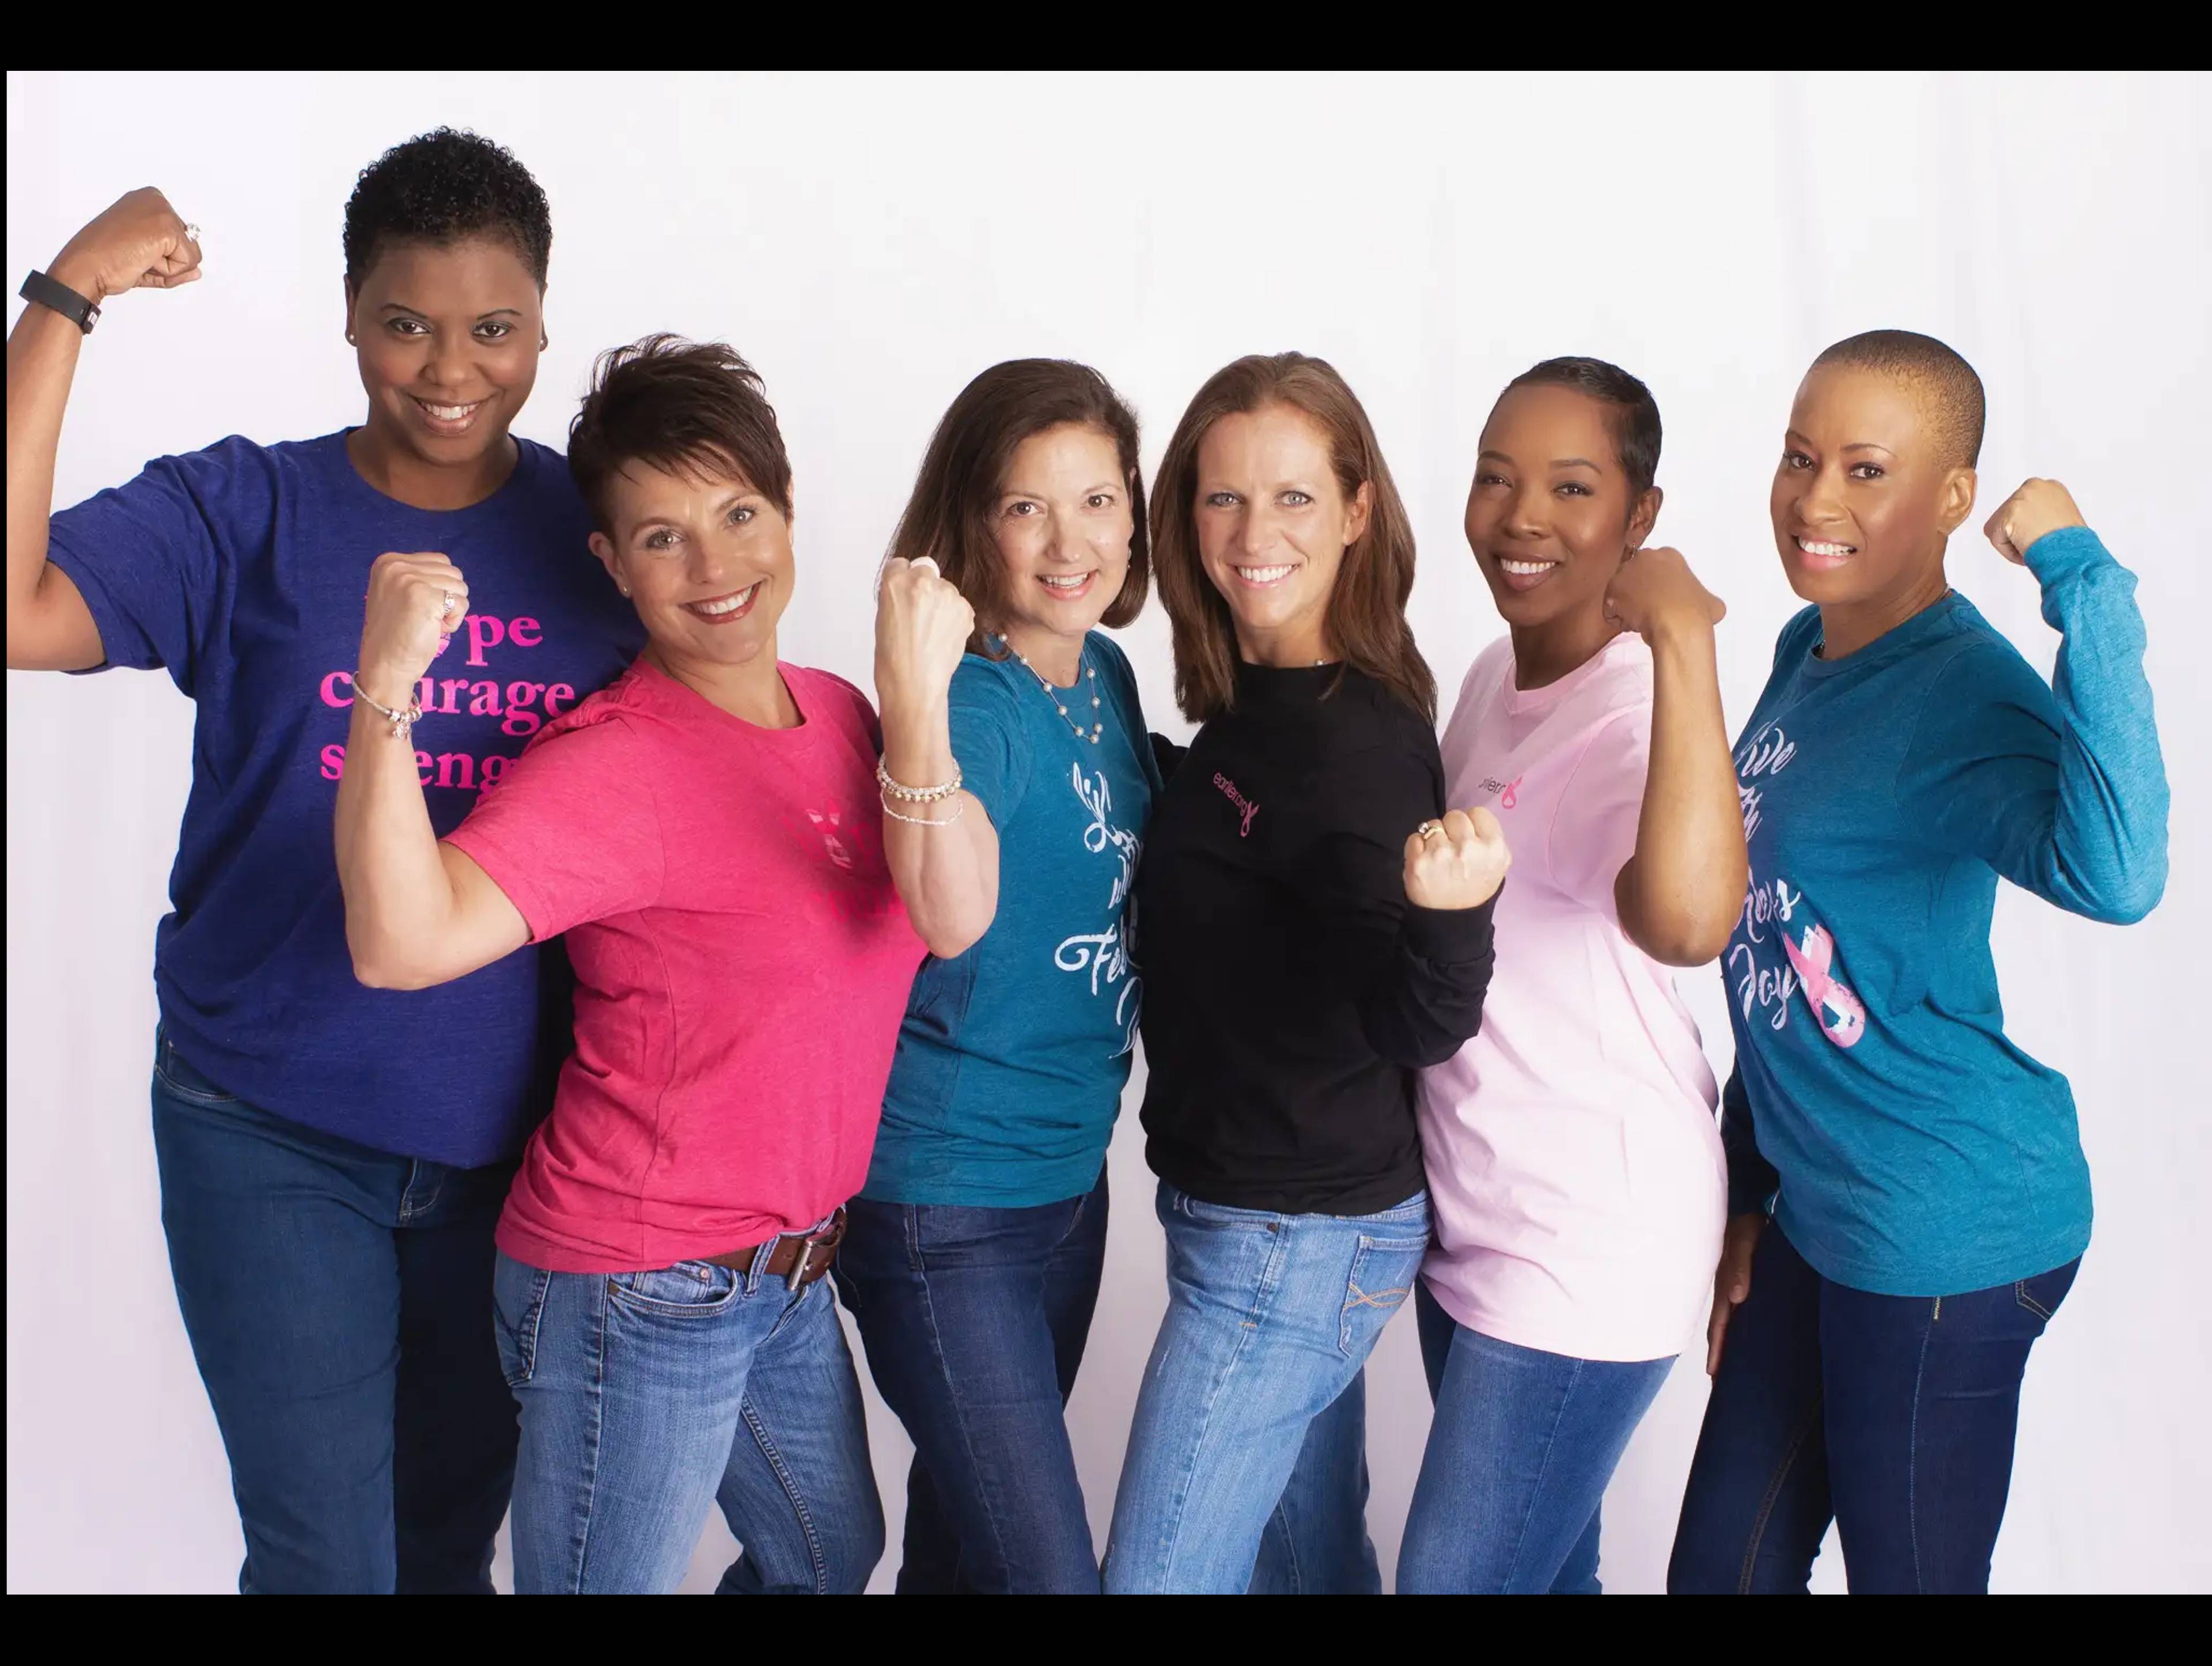 Friends For an Earlier Breast Cancer Test Inc